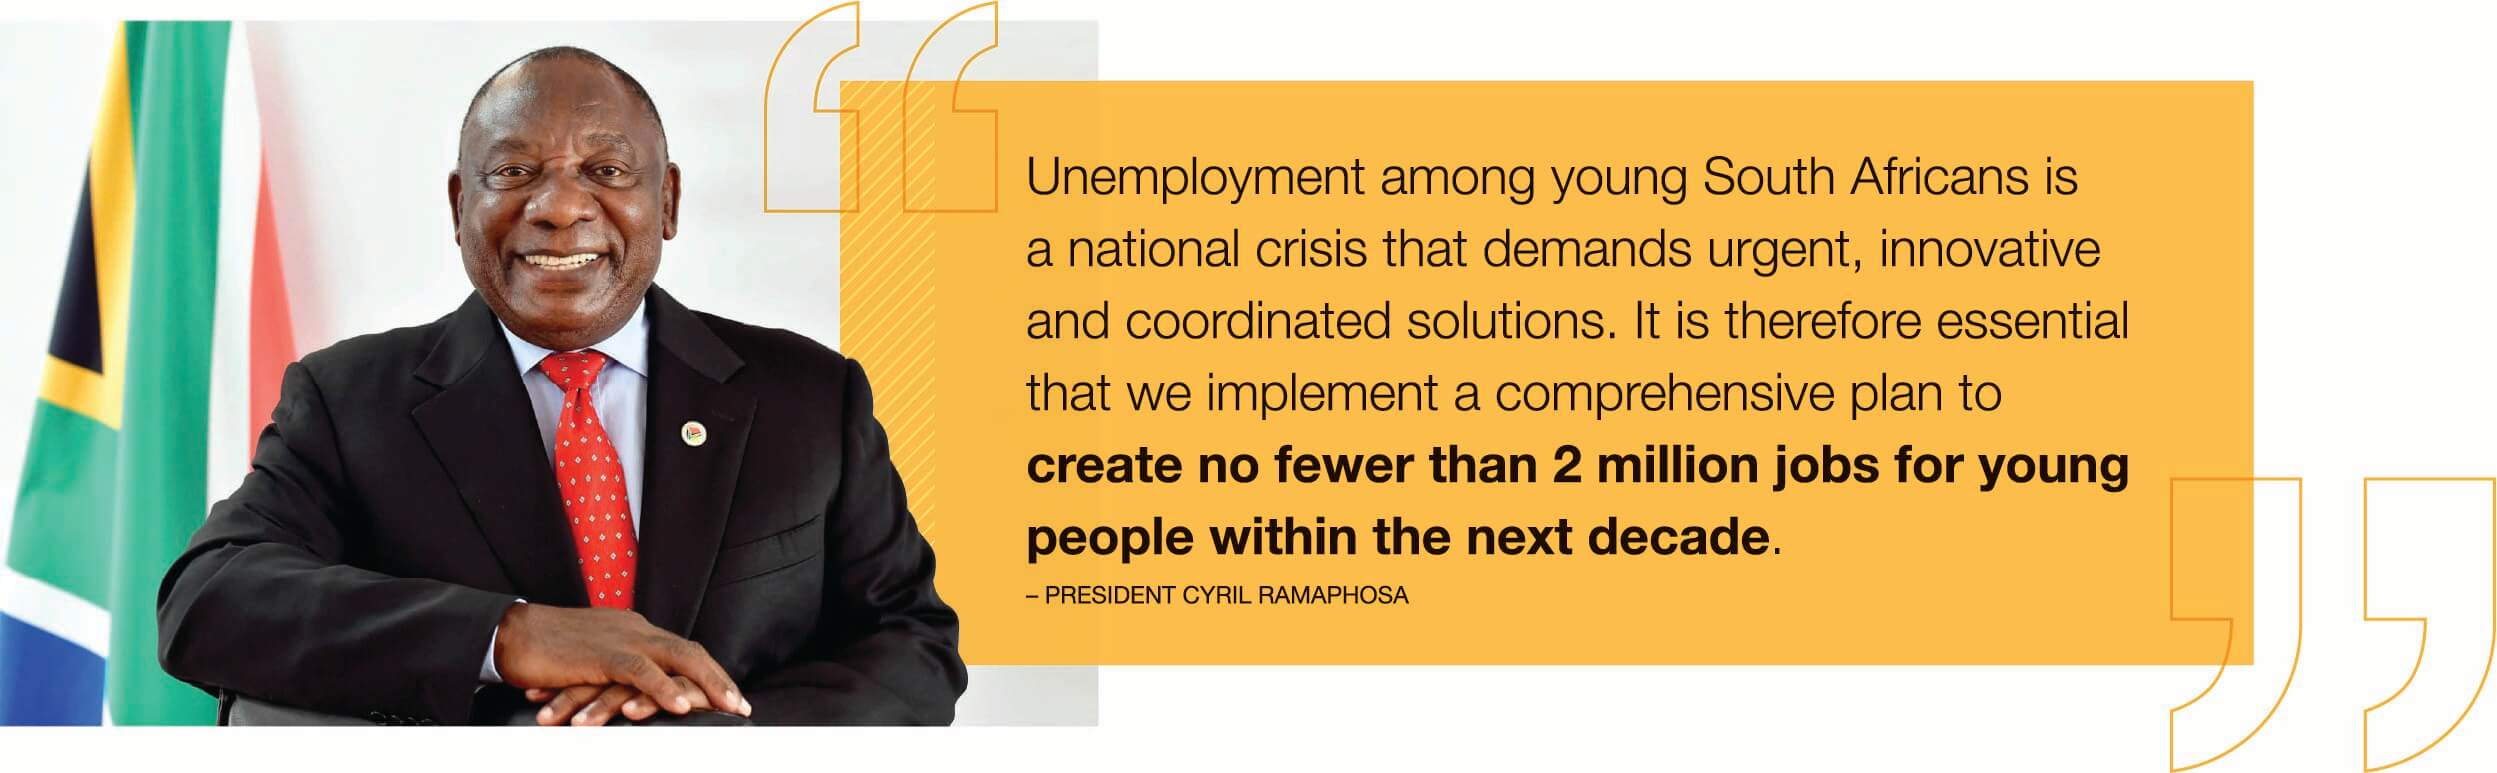 Unemployment among young South Africans is
    a national crisis that demands urgent, innovative and coordinated solutions.